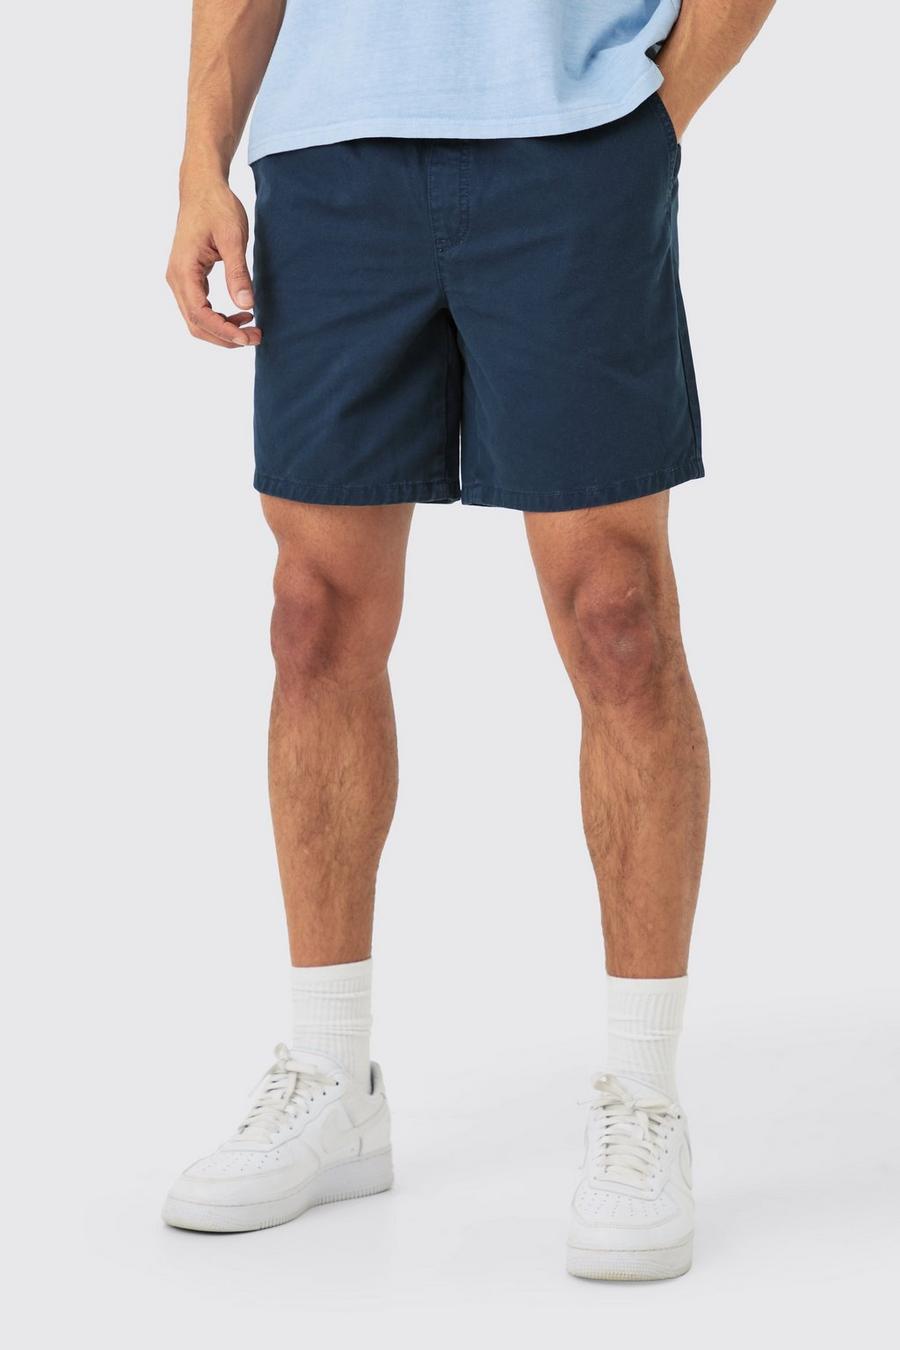 Shorter Length Relaxed Fit Elasticated Waist Chino Shorts in Navy image number 1